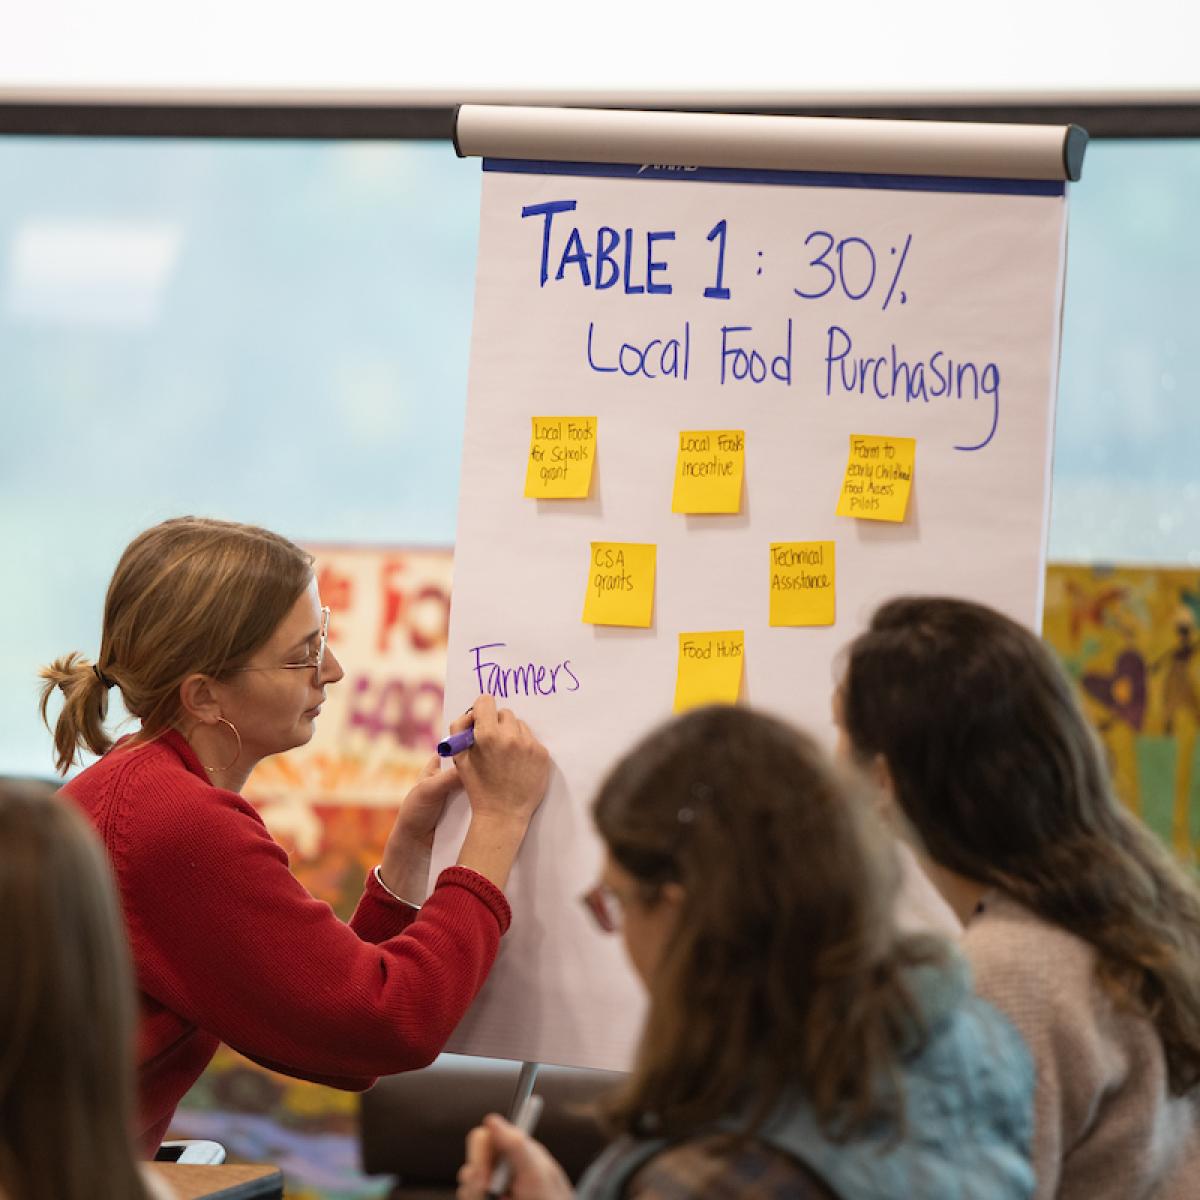 a woman leads a group in discussion, writes on a flip chart entitled, "Table 1: 30% Local Food Purchasing"